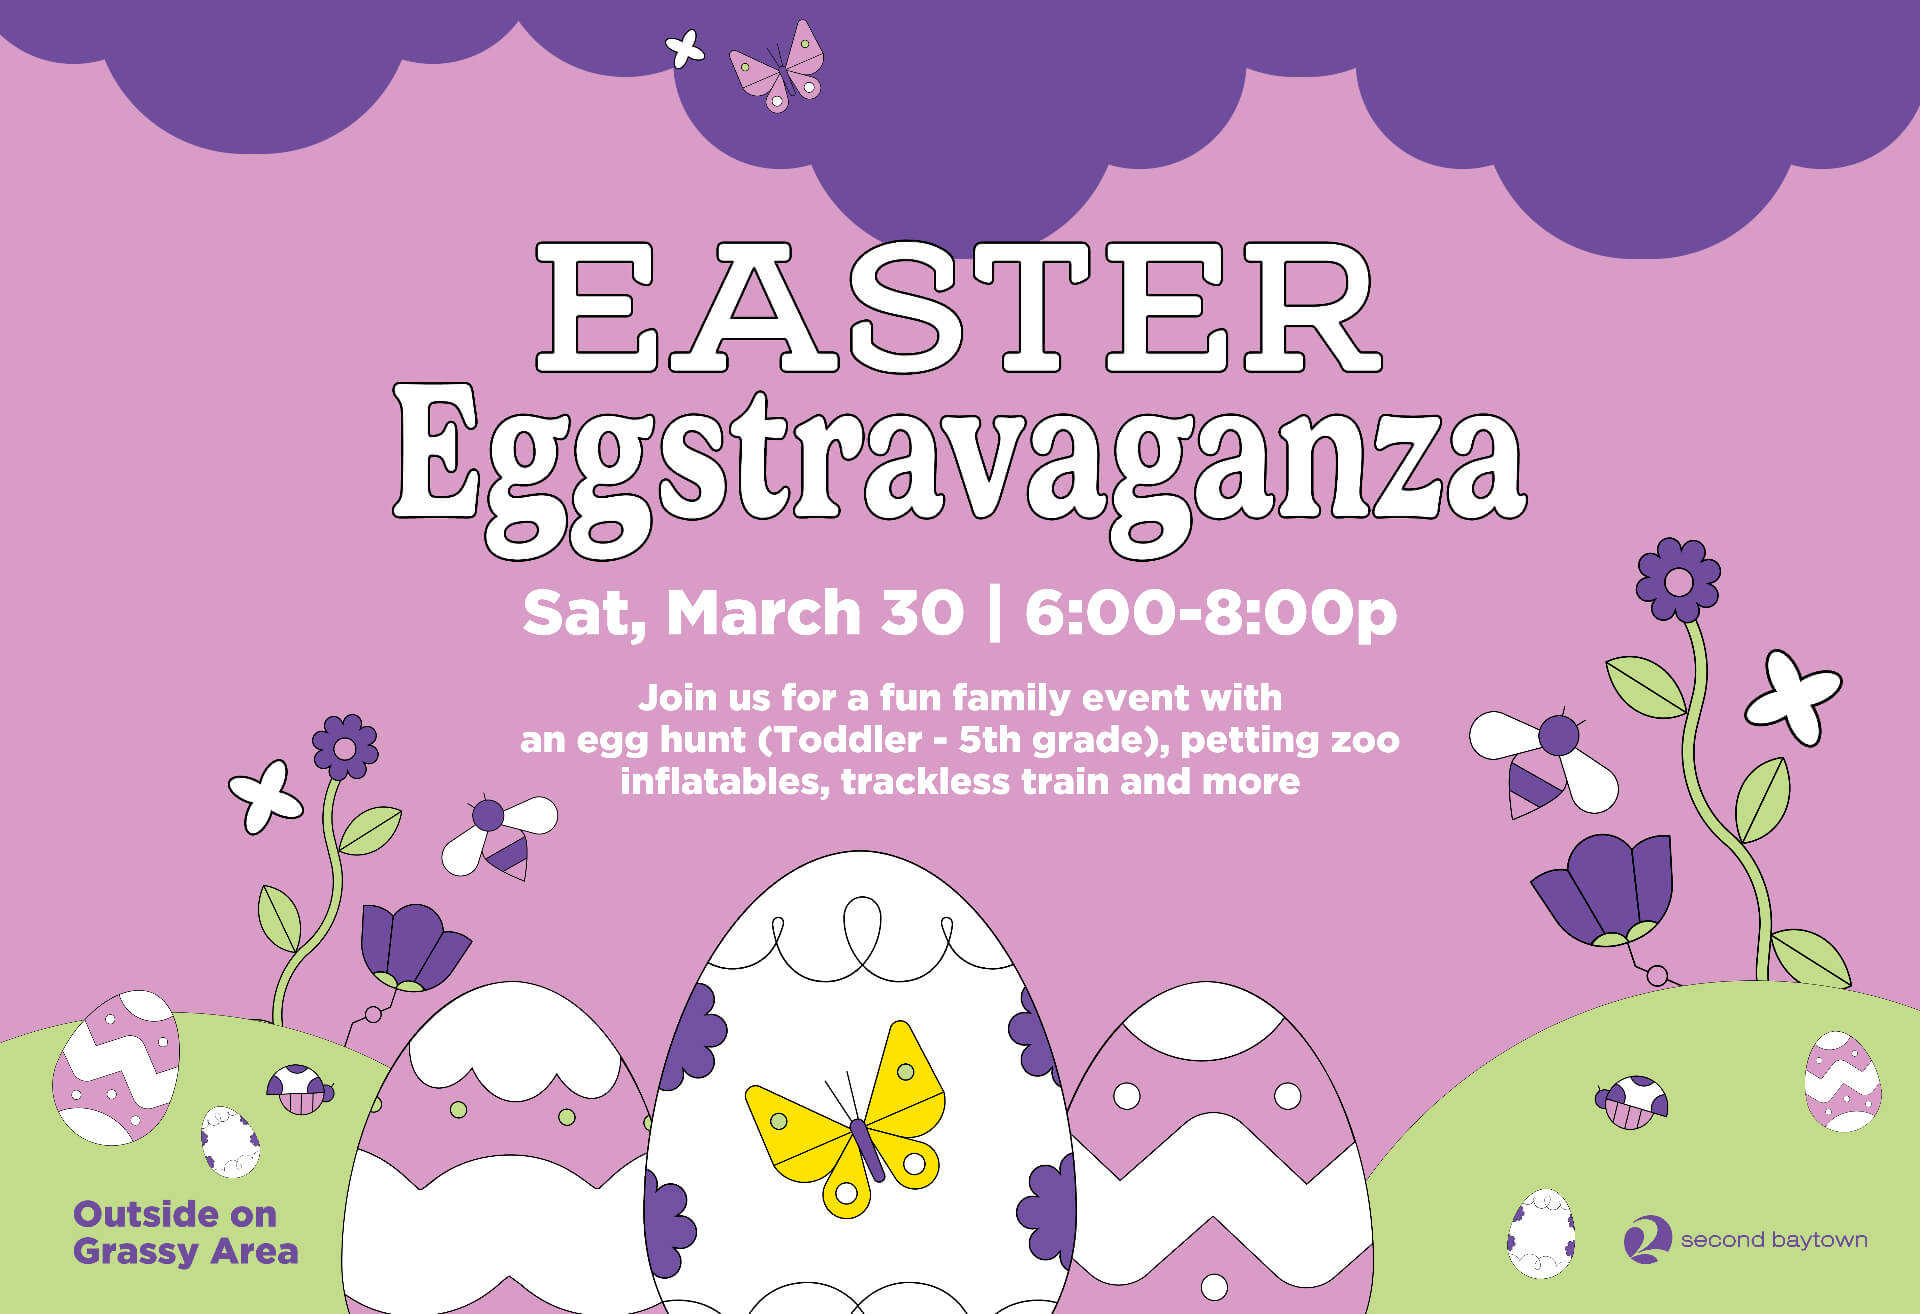 easter eggstravaganza, sat mar 30 6-8pm. join us for a fun family event with an egg hunt (toddler-5th grade), petting zoo, inflatables, trackless train and more!